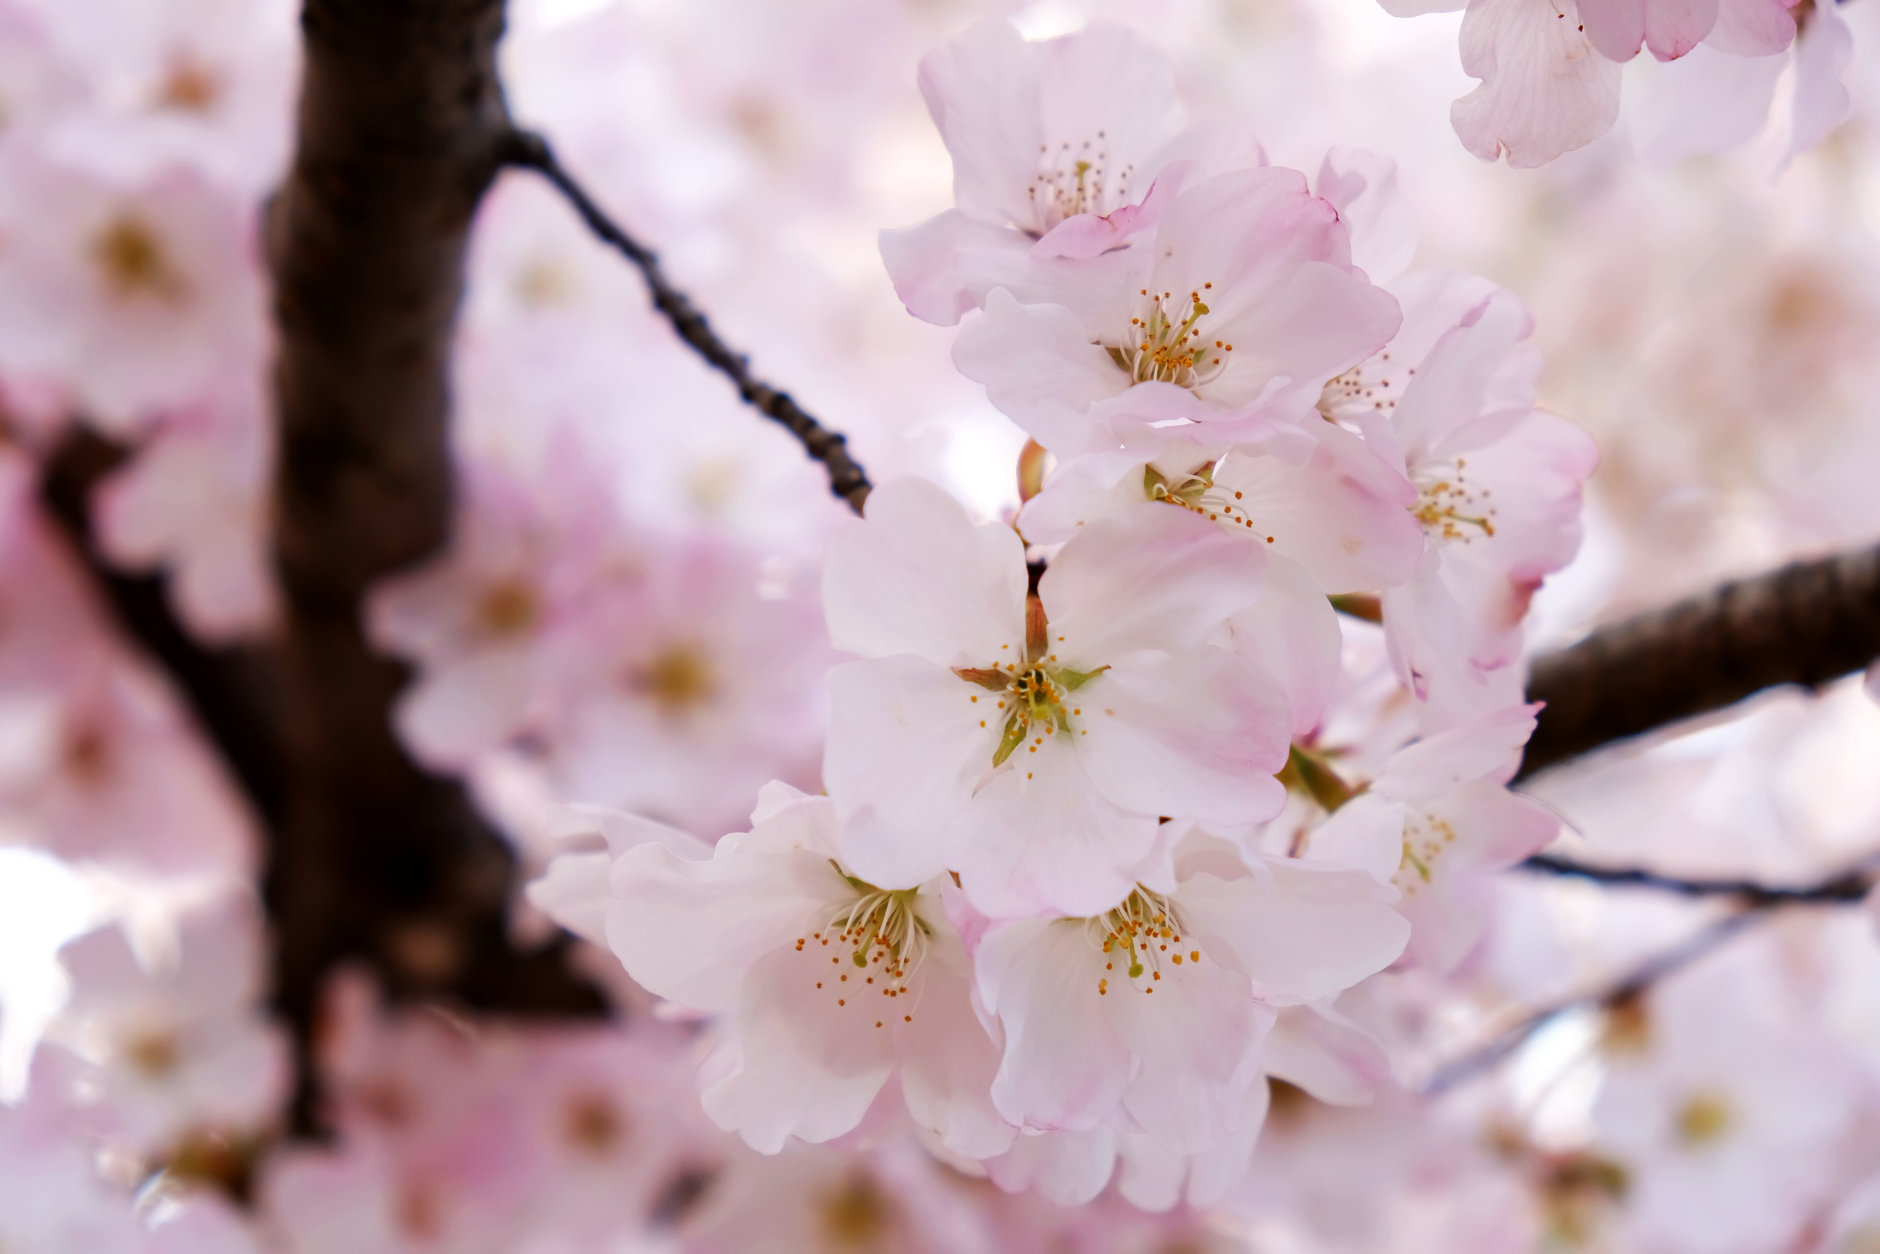 The D.C. Cherry Blossoms are nearing peak bloom. (Courtesy Shannon Finney/shannonfinneyphotography.com)